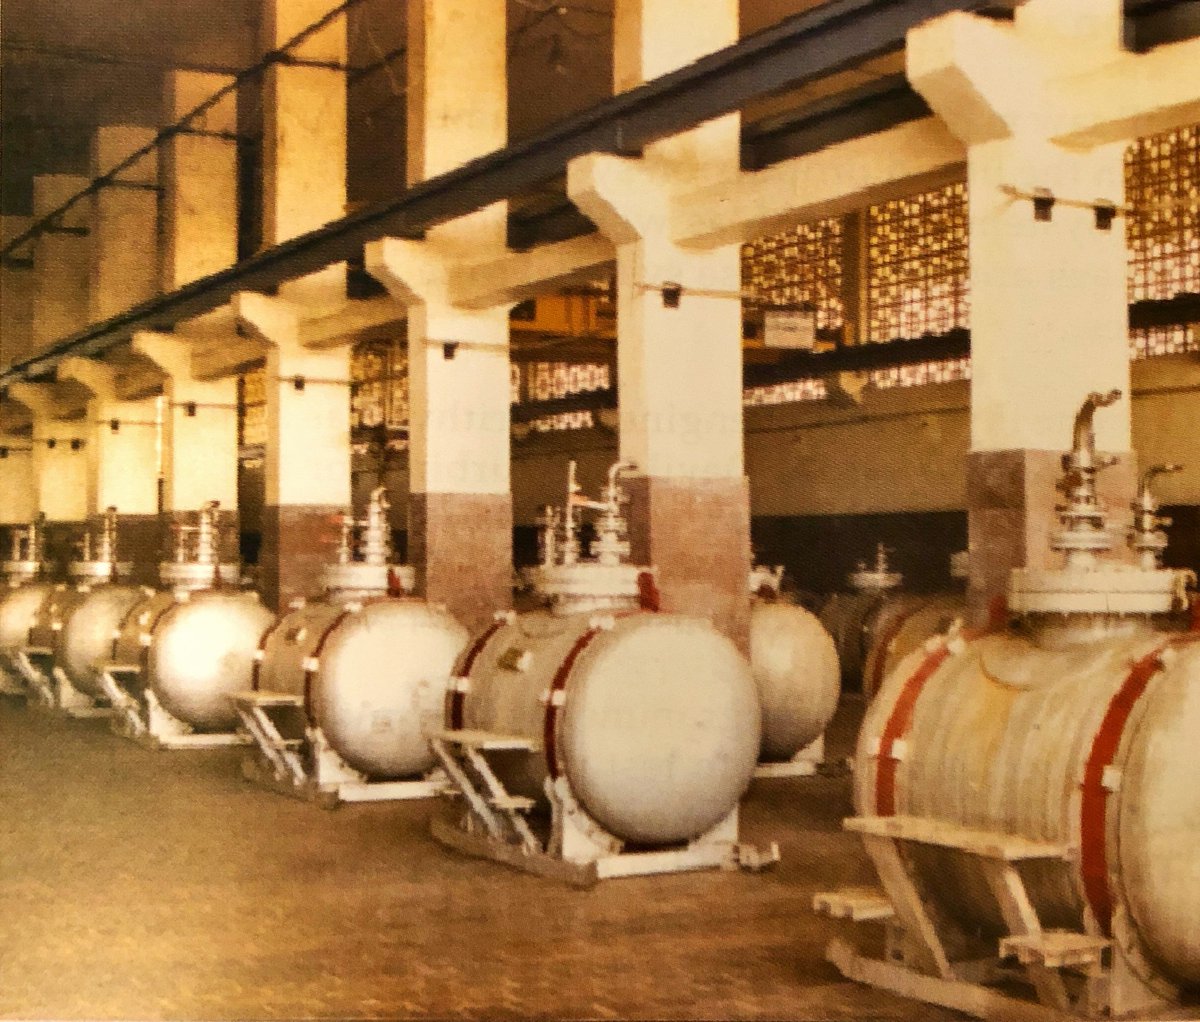 The motor used something called "G-Fuel" (lmao), a 1:1 mixture of xylidene and triethylamine. The xylidene was initially produced at IPCL Patalaganga; pictured at left are DRDL's liquid propellant storage tanks.